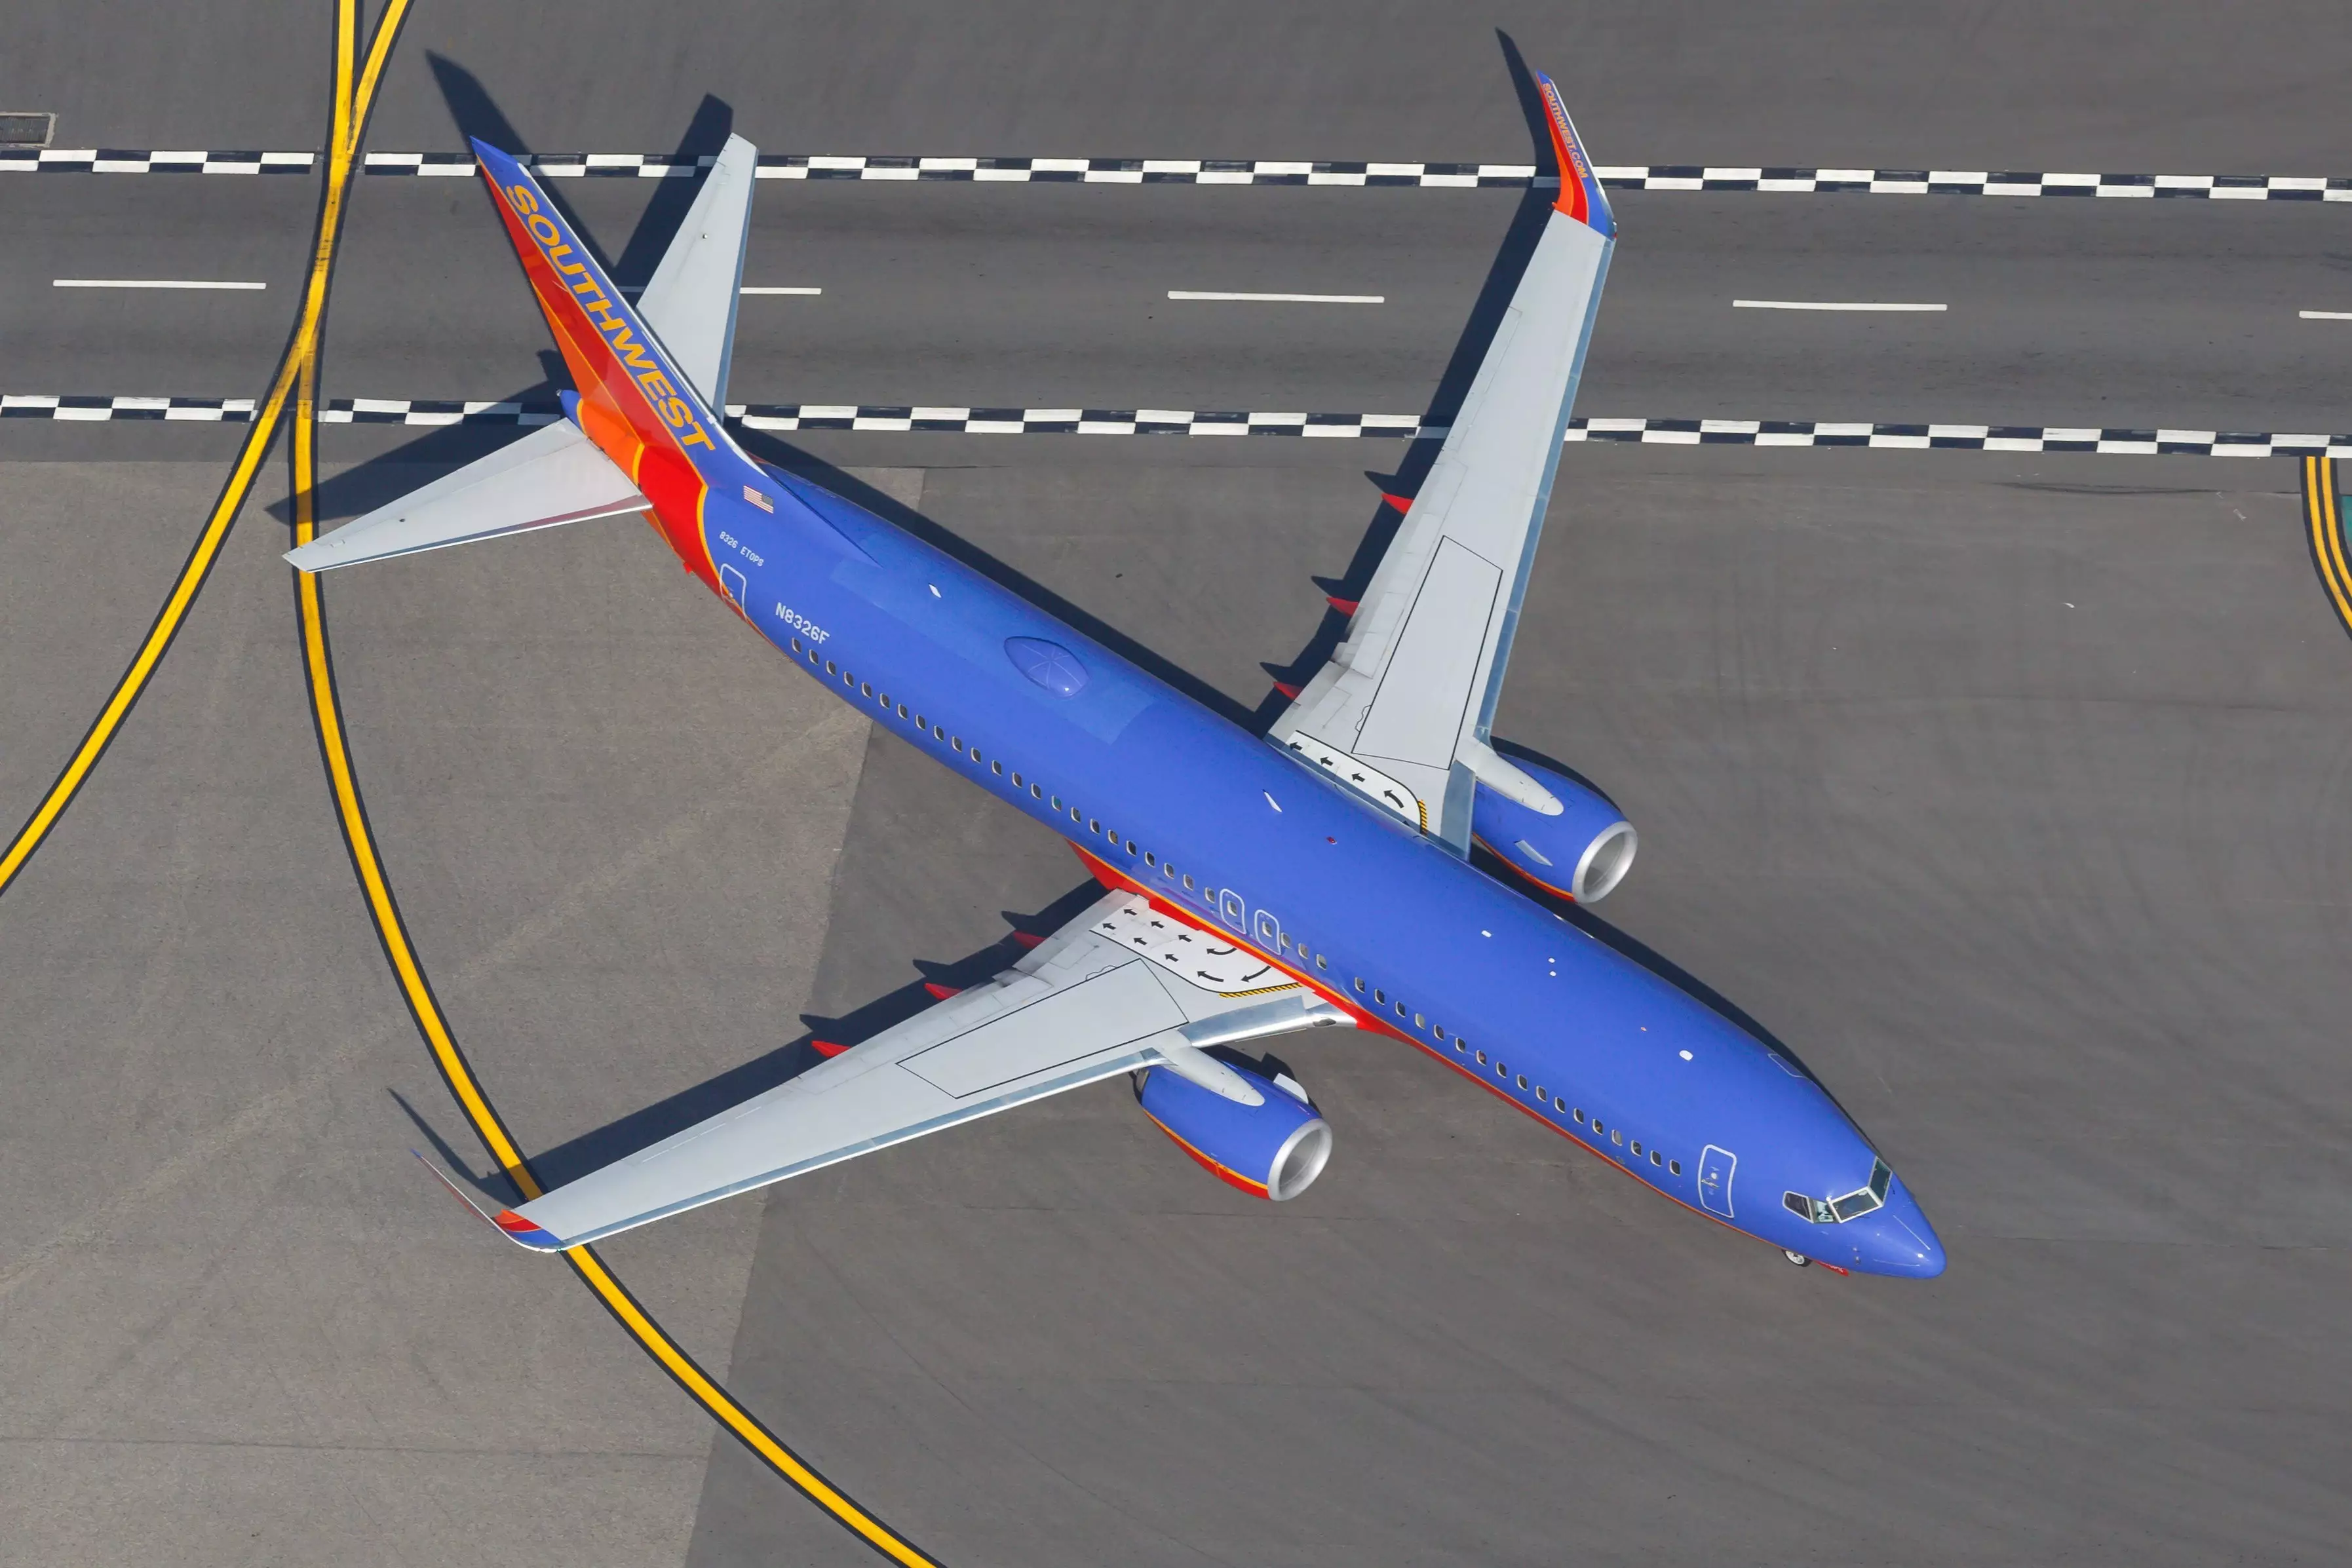 Southwest Airlines has apologised following the incident.